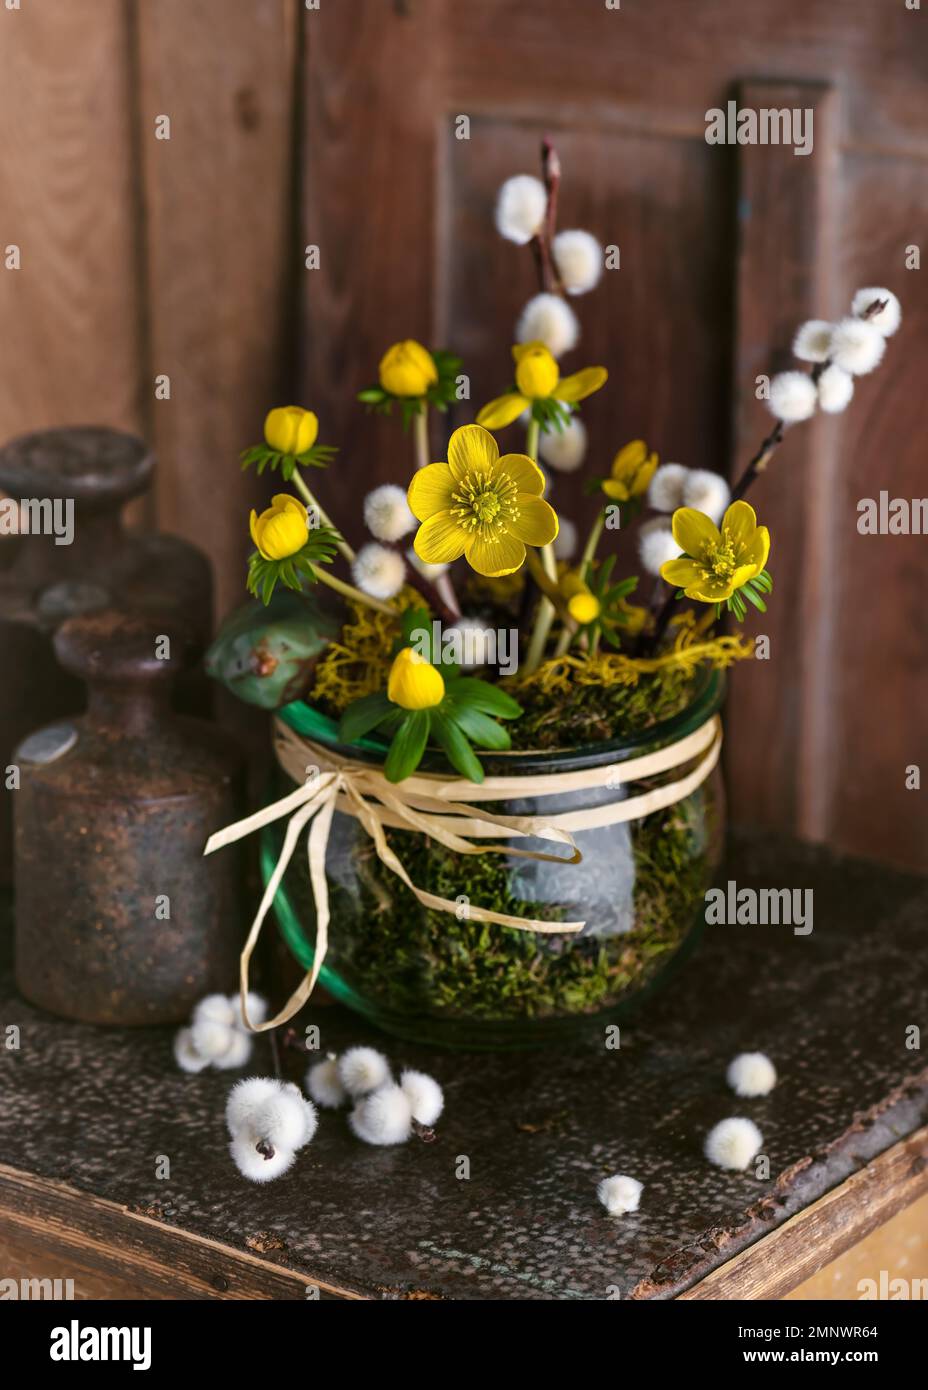 Beautiful spring floristic arrangement  with yellow Winter aconite flowers and willow catkins in a glass jar. Rustic home decor concept. Copy space. Stock Photo